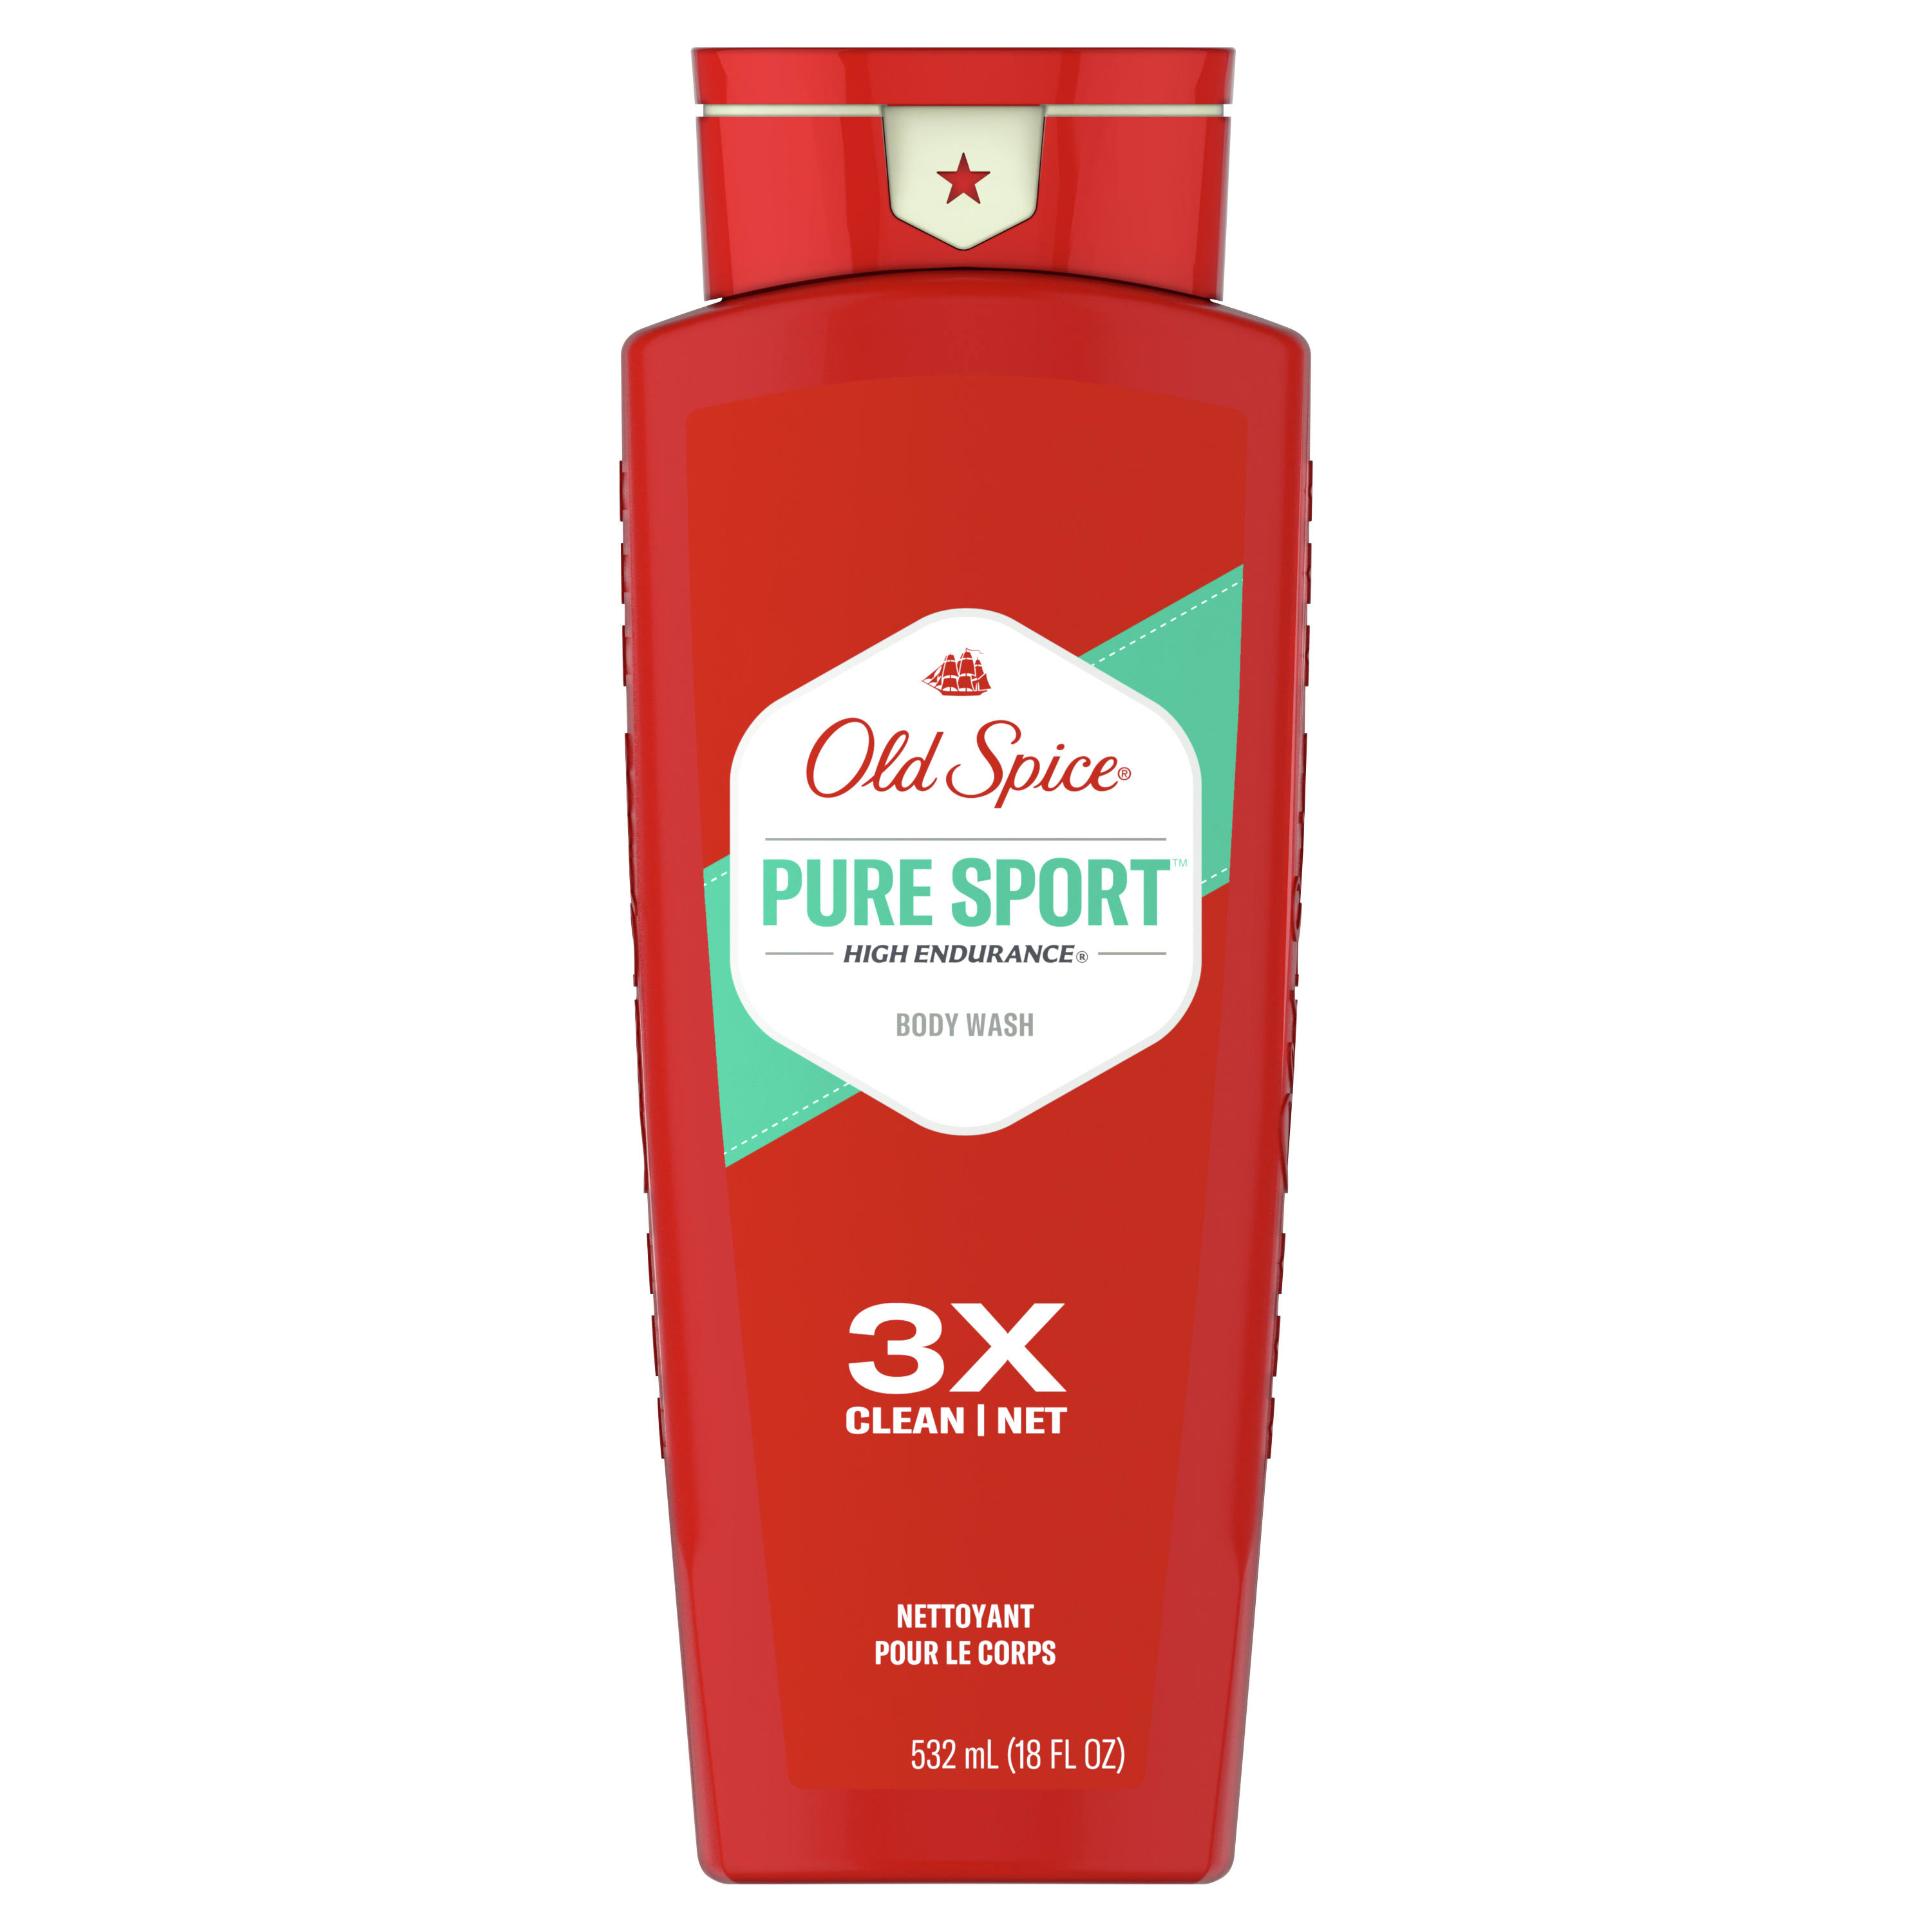 Old Spice High Endurance Pure Sport Scent Men's Body Wash - 18 Oz, Pack of 6